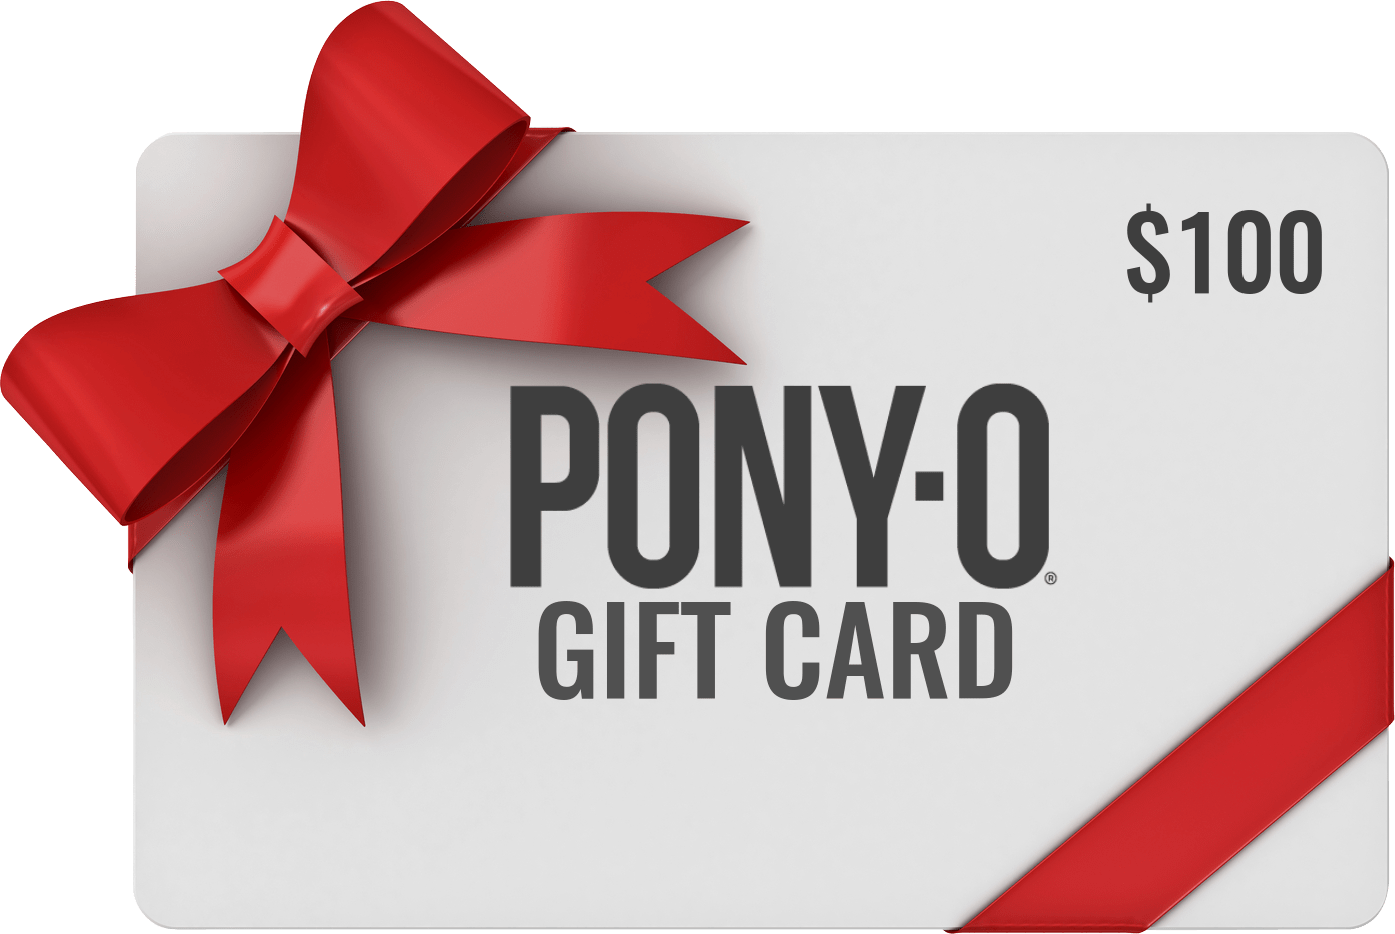 One one-hundred dollar PONY-O gift card. Not a physical card, but an electronically-transmitted item.